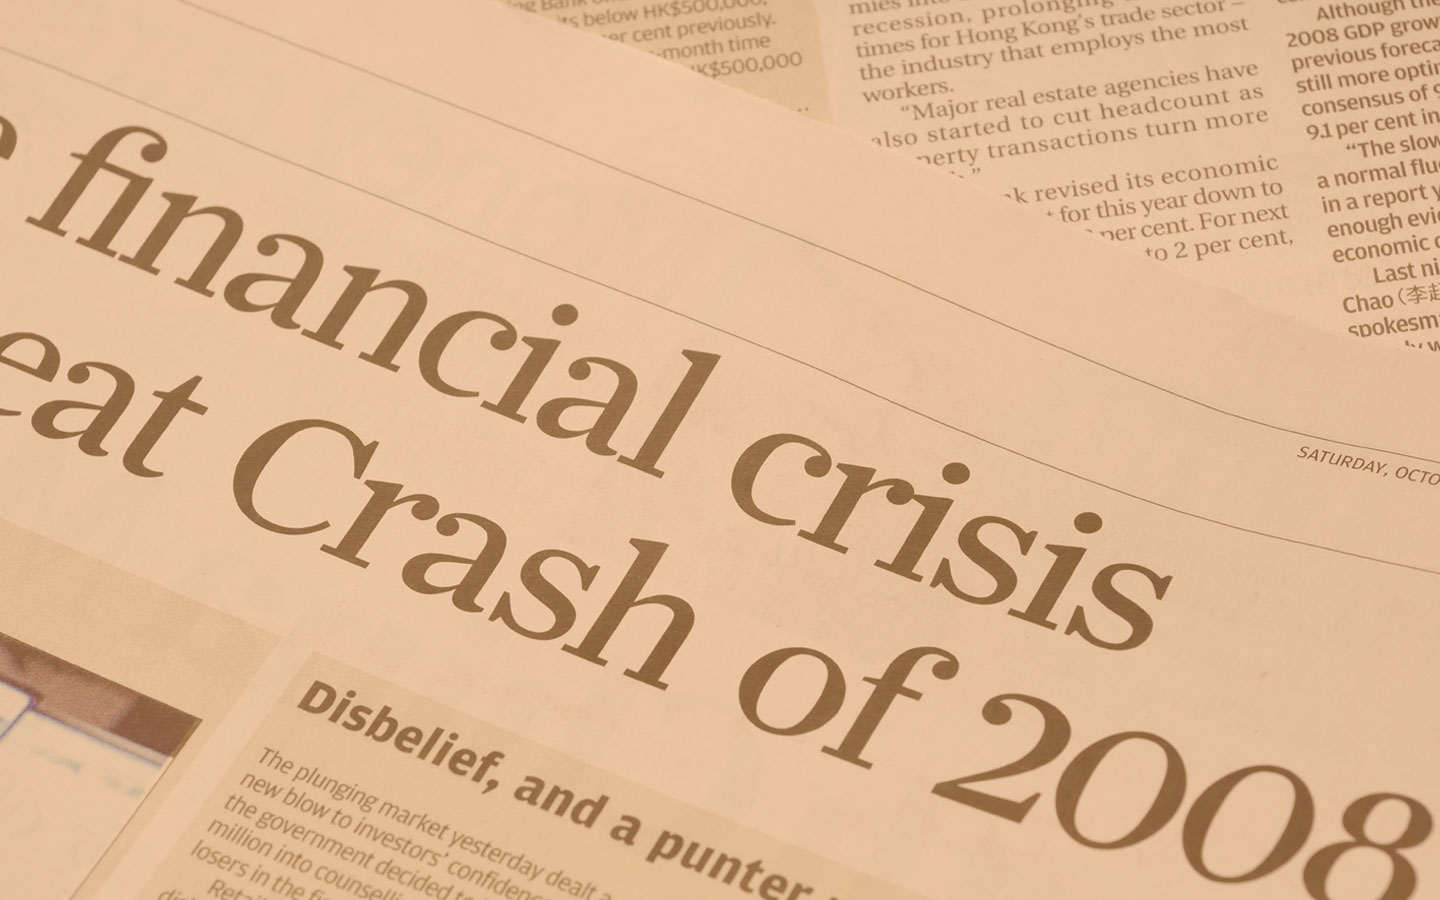 Newspaper article about Financial crash of 2008